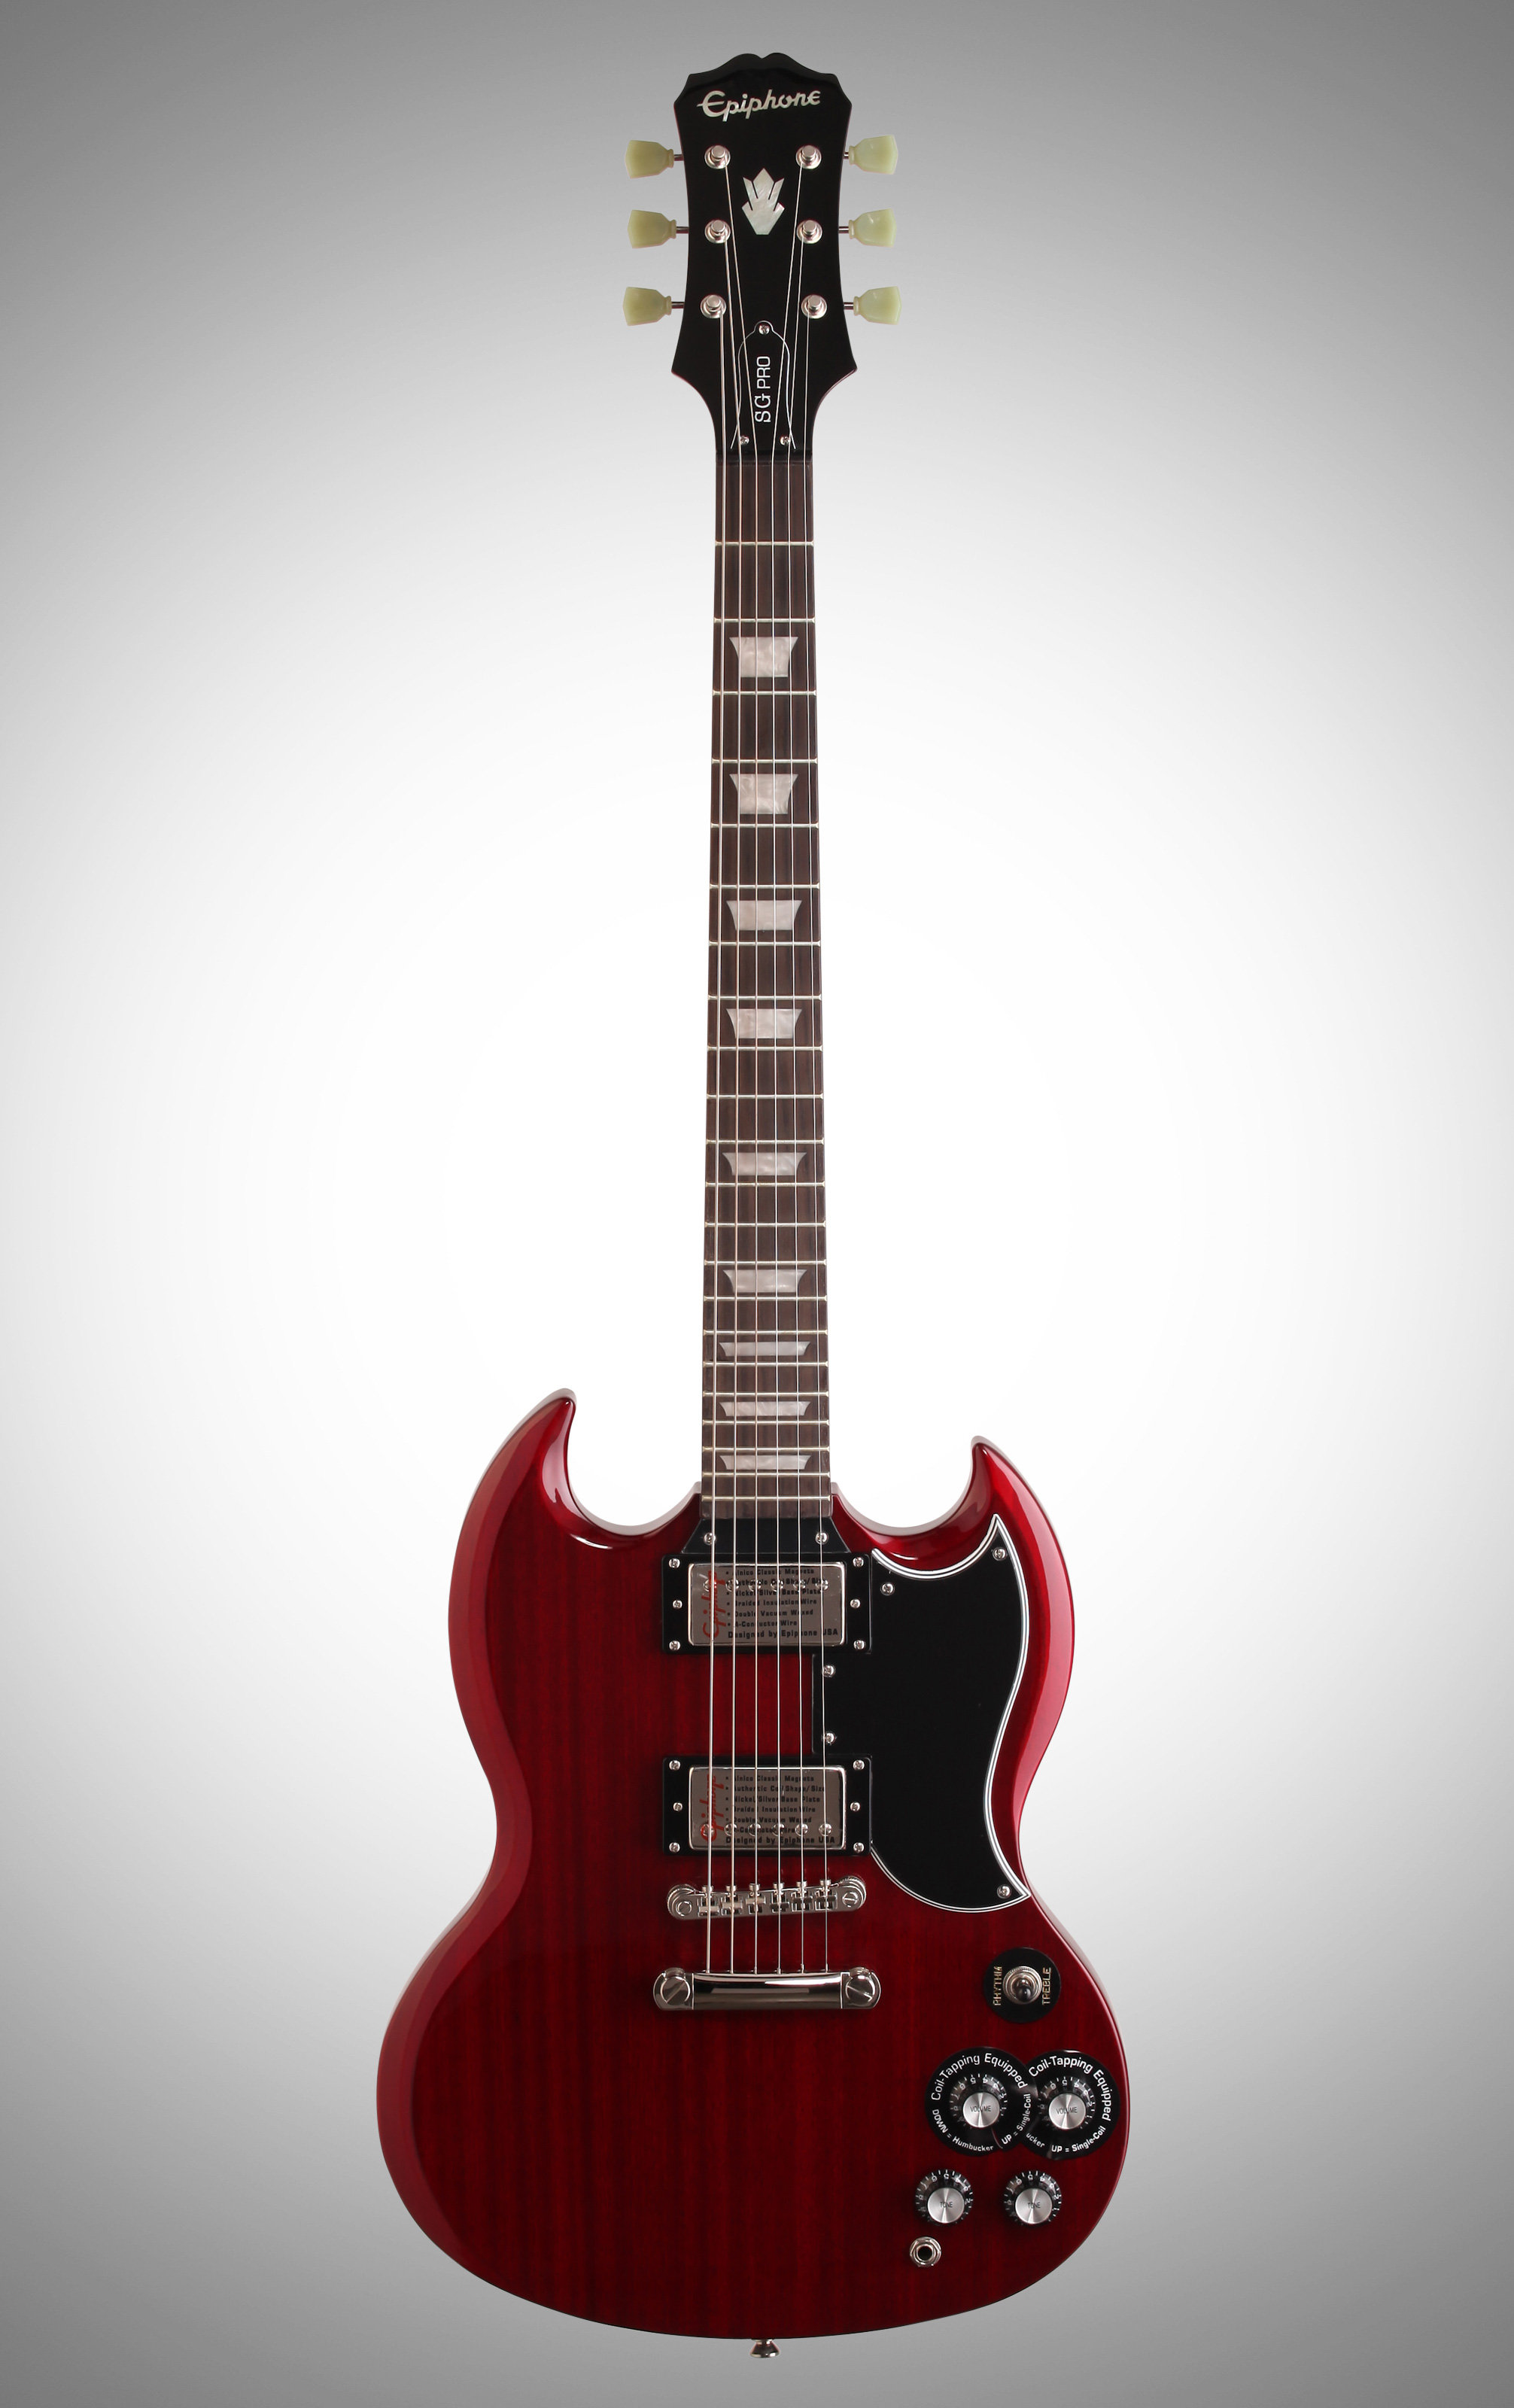 Epiphone G400 PRO Electric Guitar, Cherry
